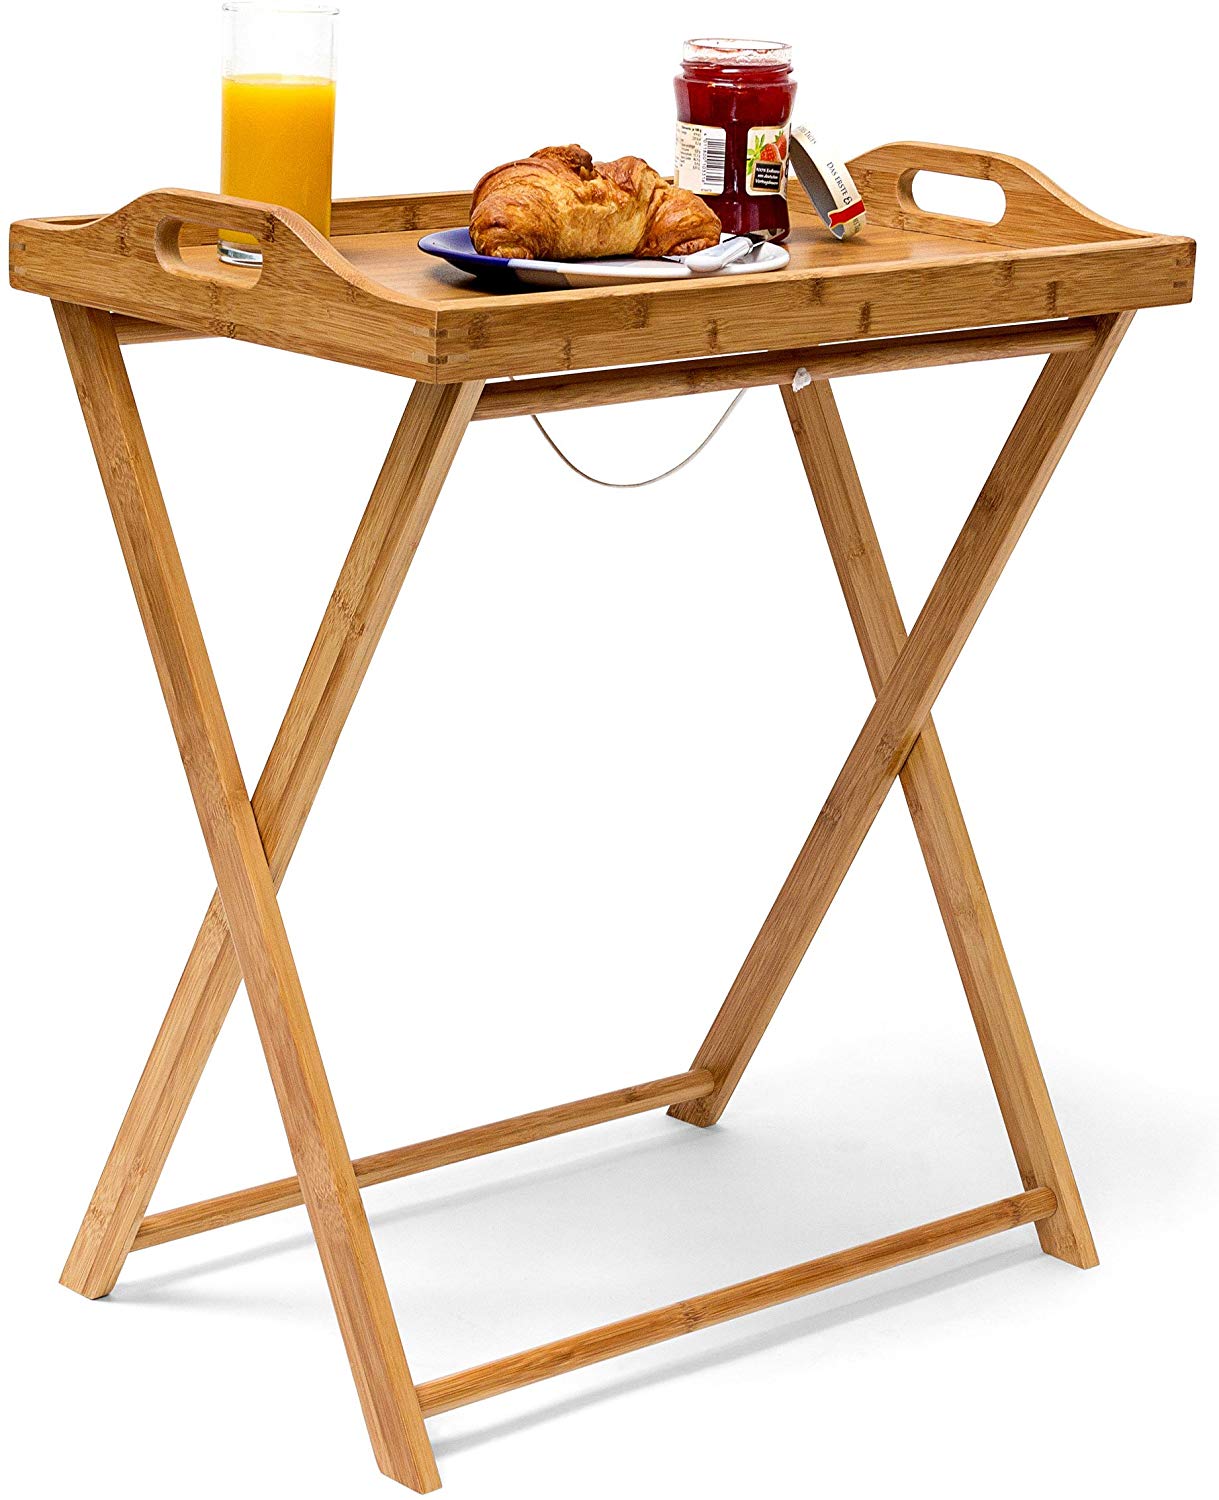 Relaxdays Bamboo Tray Table H X W X D: Approx. 63.5 X 55 X 35 Cm, Side Tabl